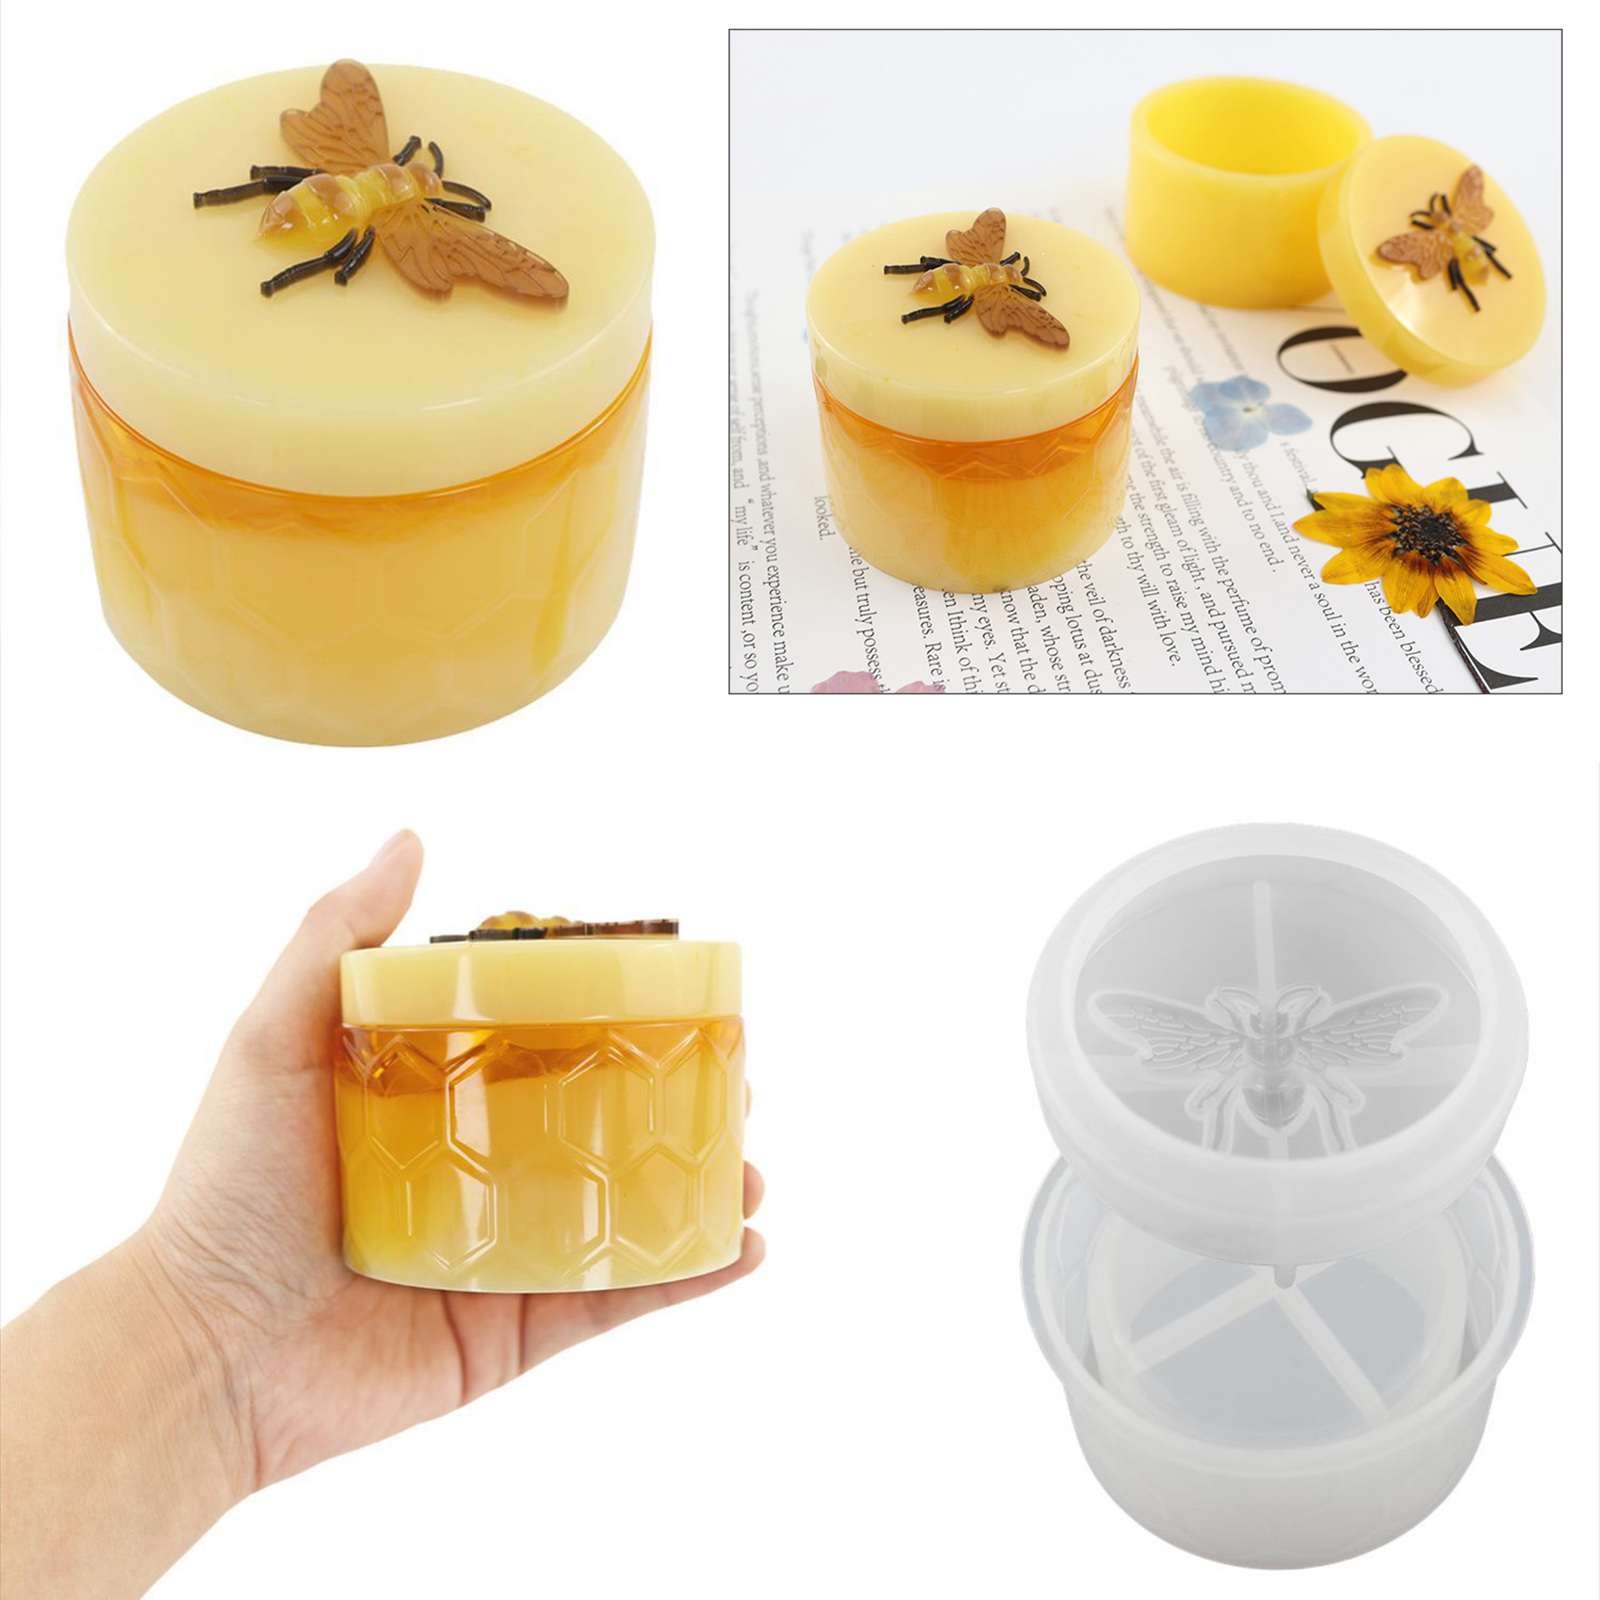 Crystal Epoxy Resin Mold Kit Drawer Handle Silicone Mold for Serving Board